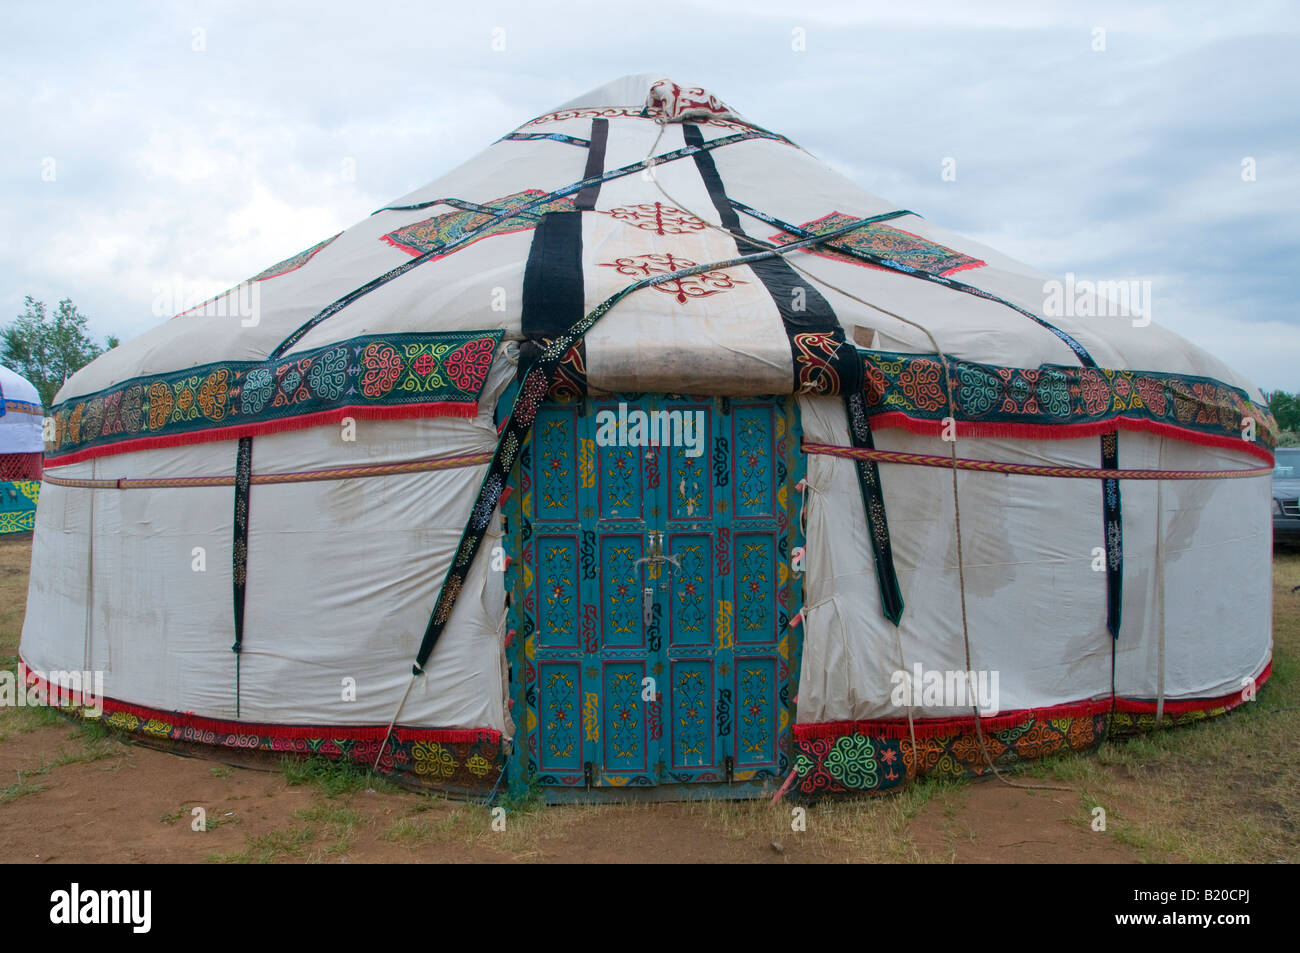 A traditional yurt or ger which portable, round tent covered with felt and used as a dwelling by nomads in the steppes of Central Asia. Stock Photo